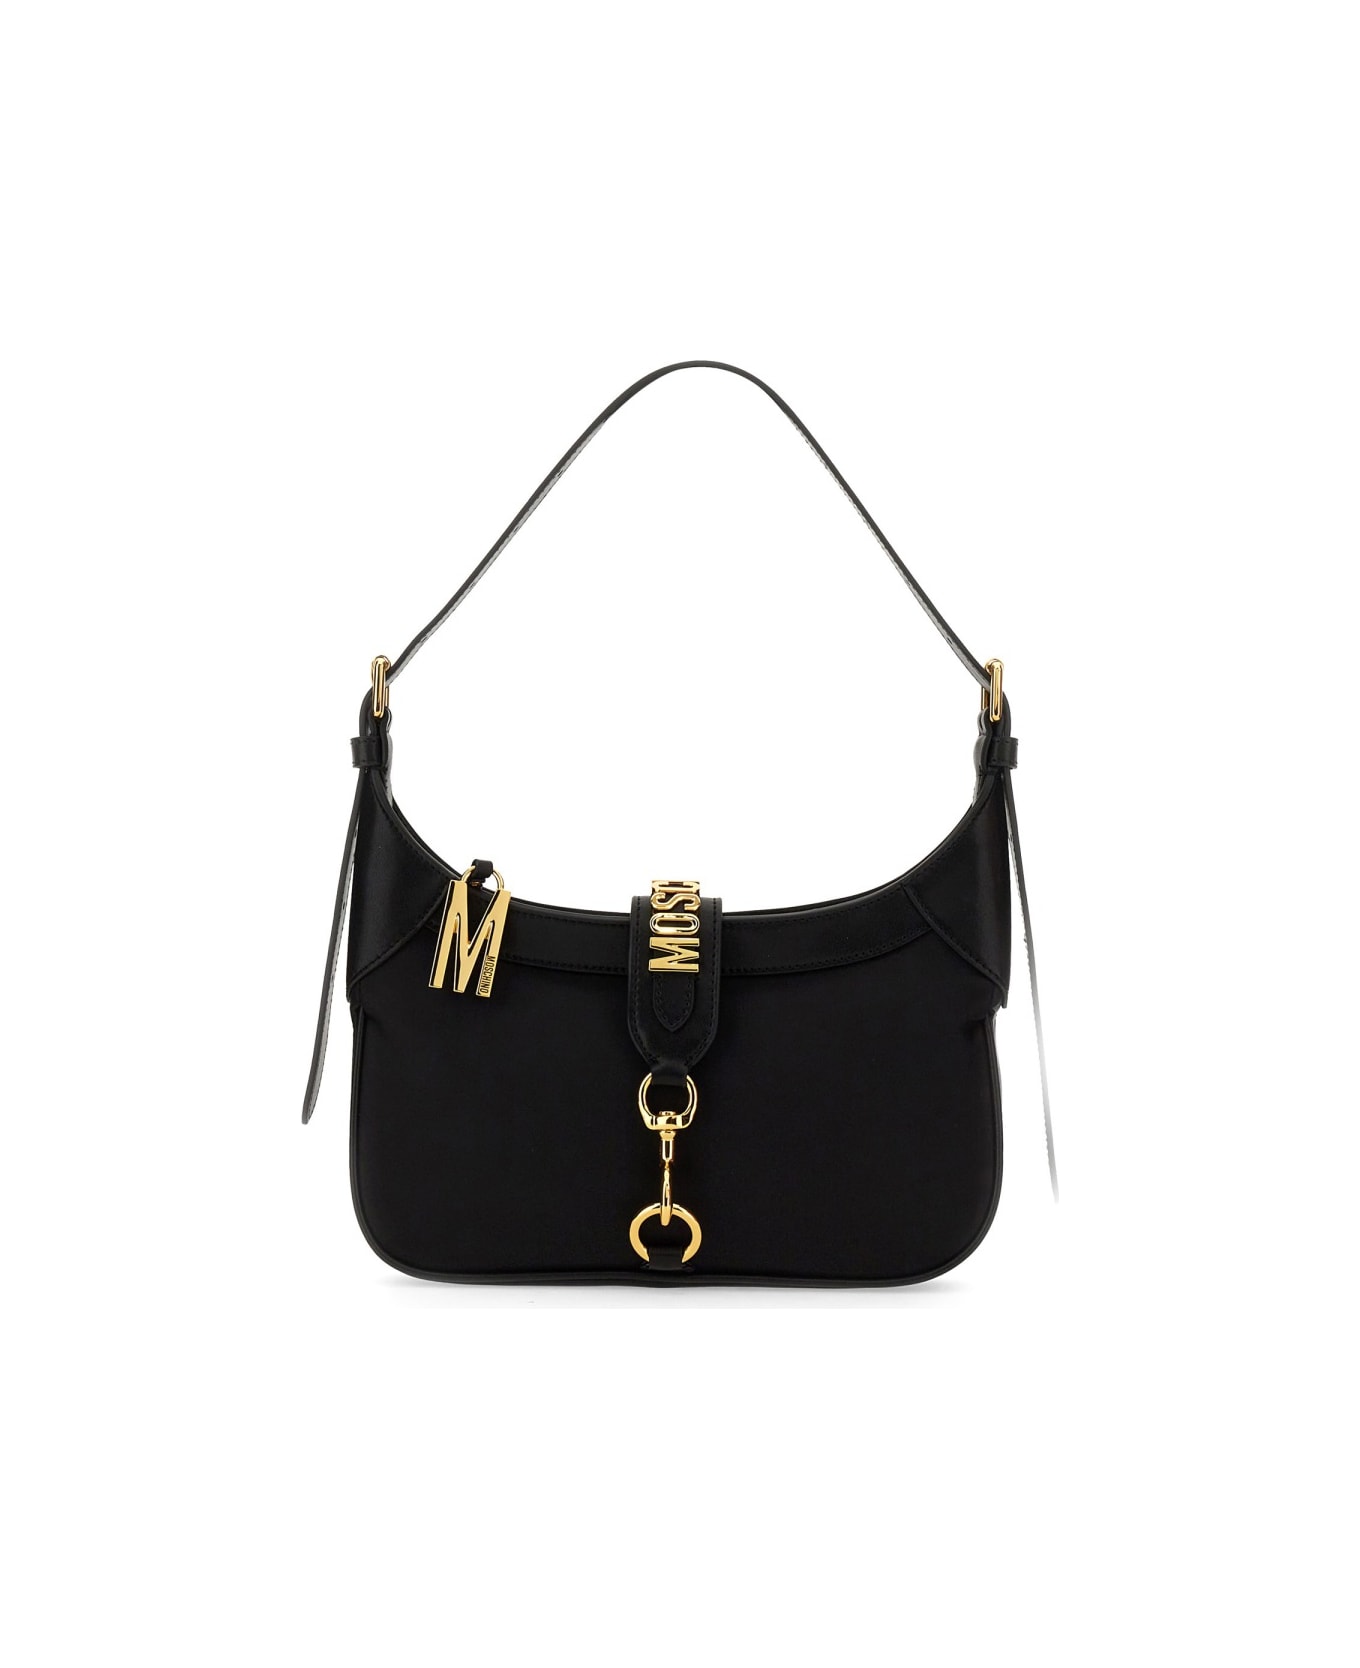 Moschino Bag With Logo - BLACK トートバッグ